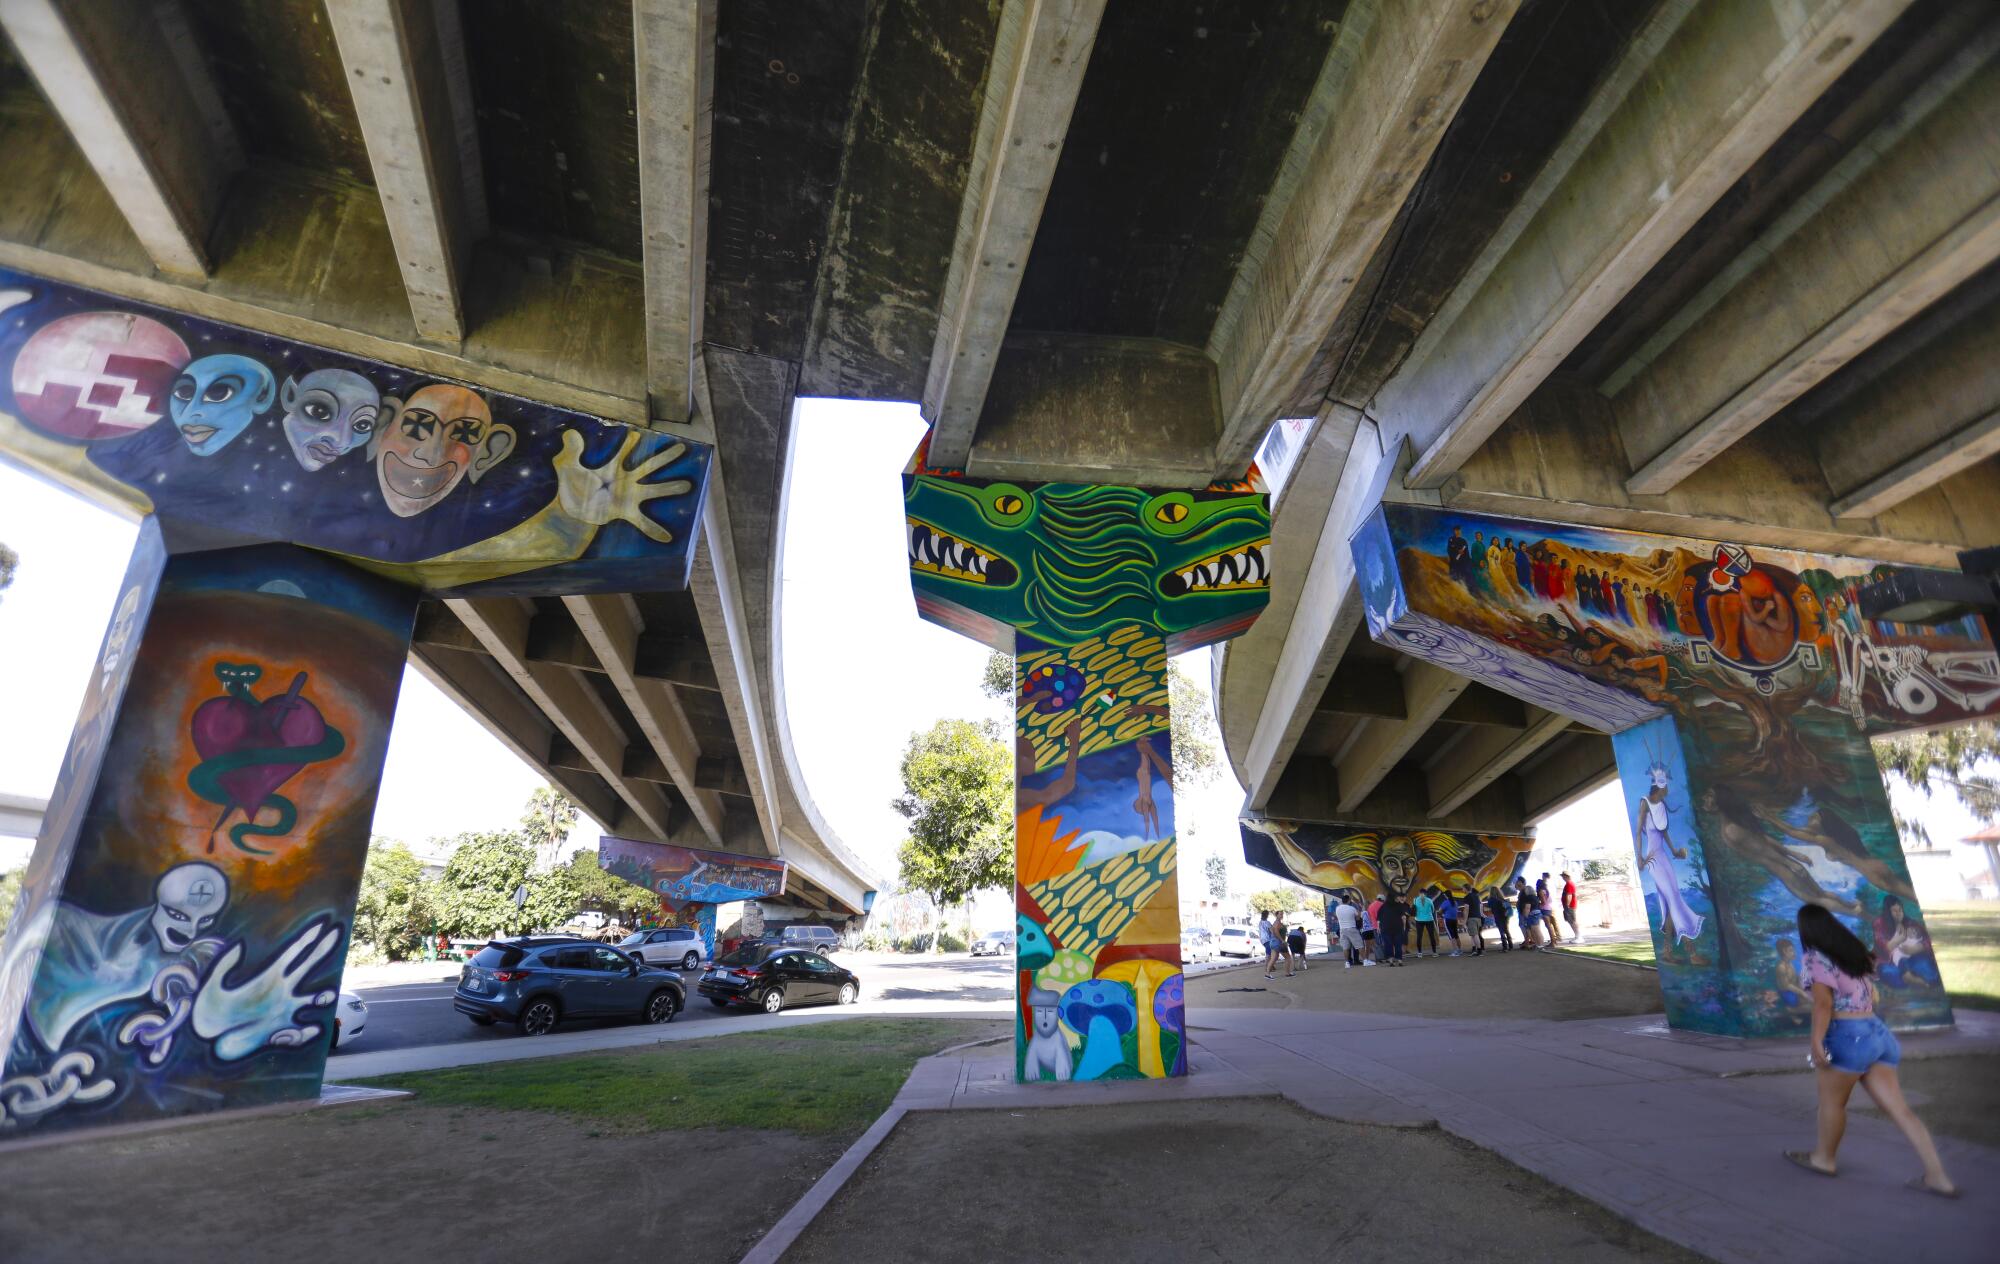 Many murals are being restored at Chicano Park as part of a larger project.